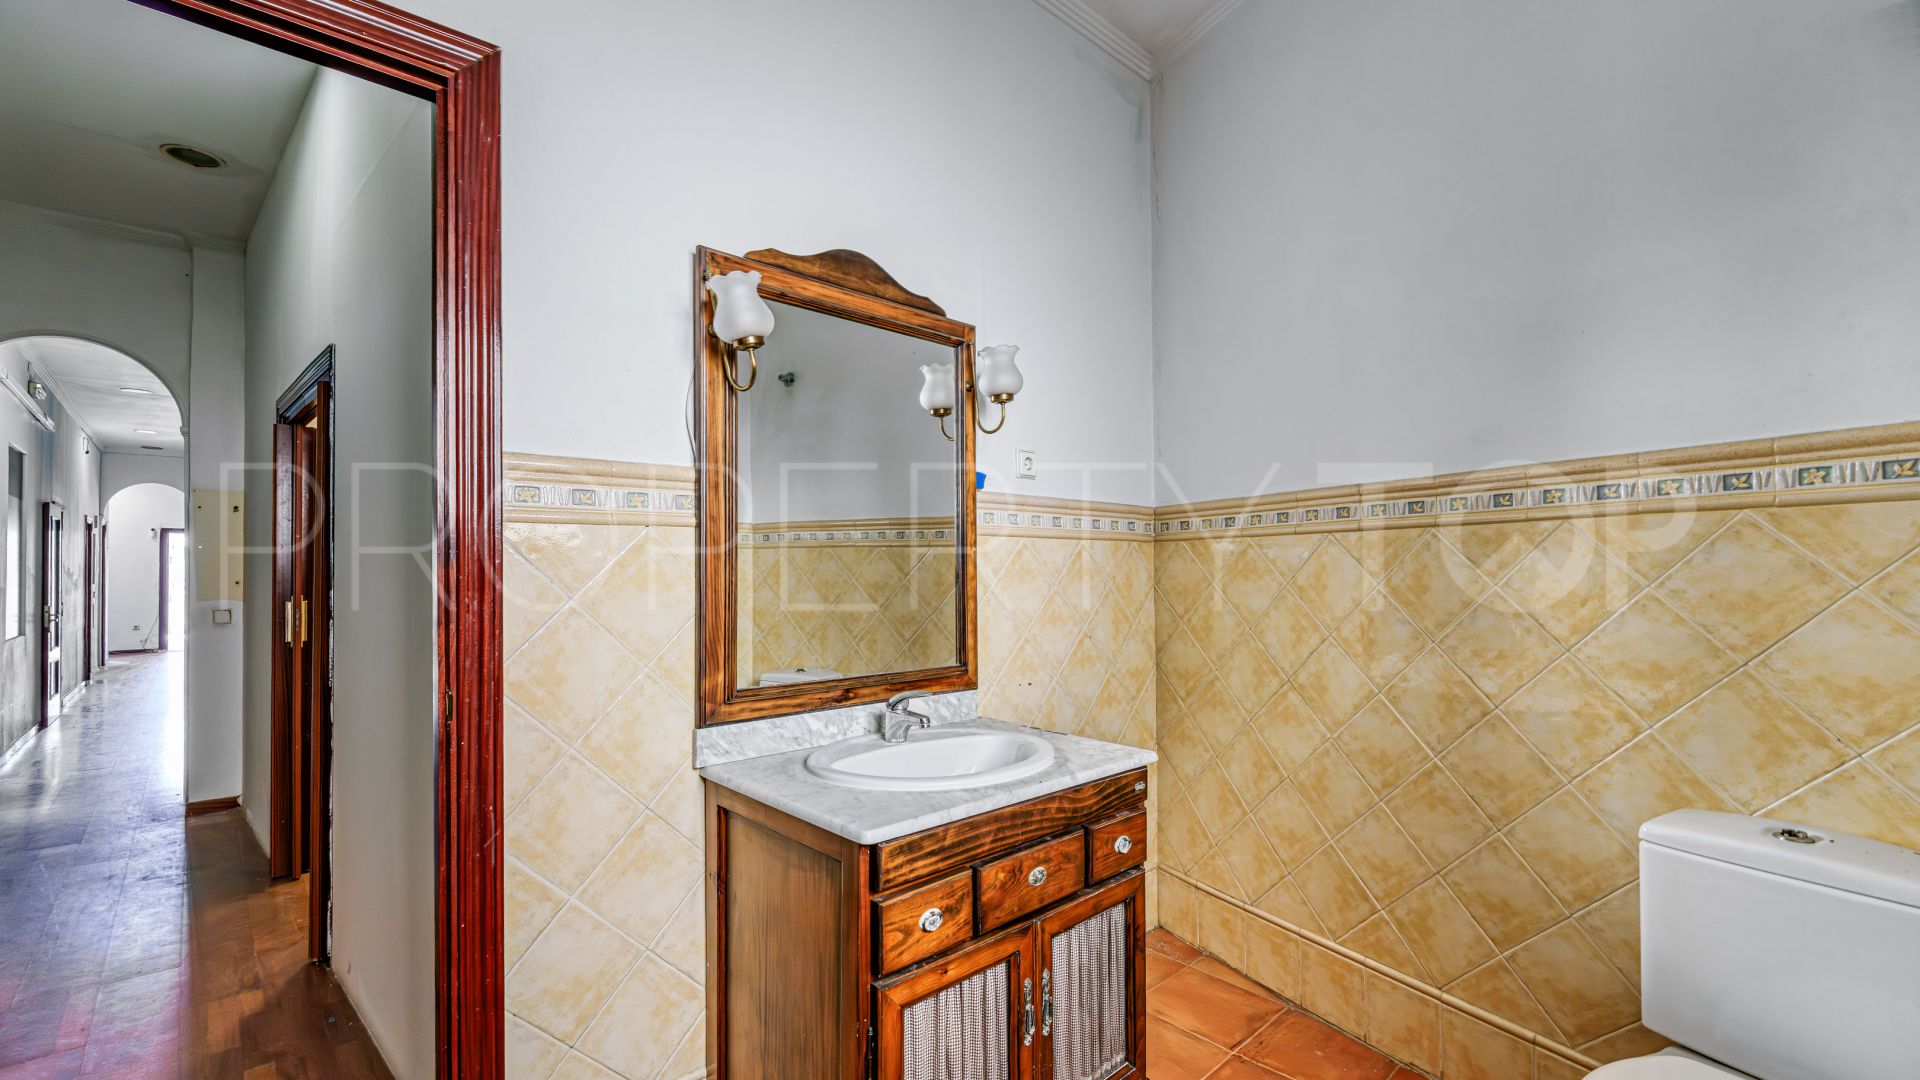 For sale Malaga apartment with 6 bedrooms